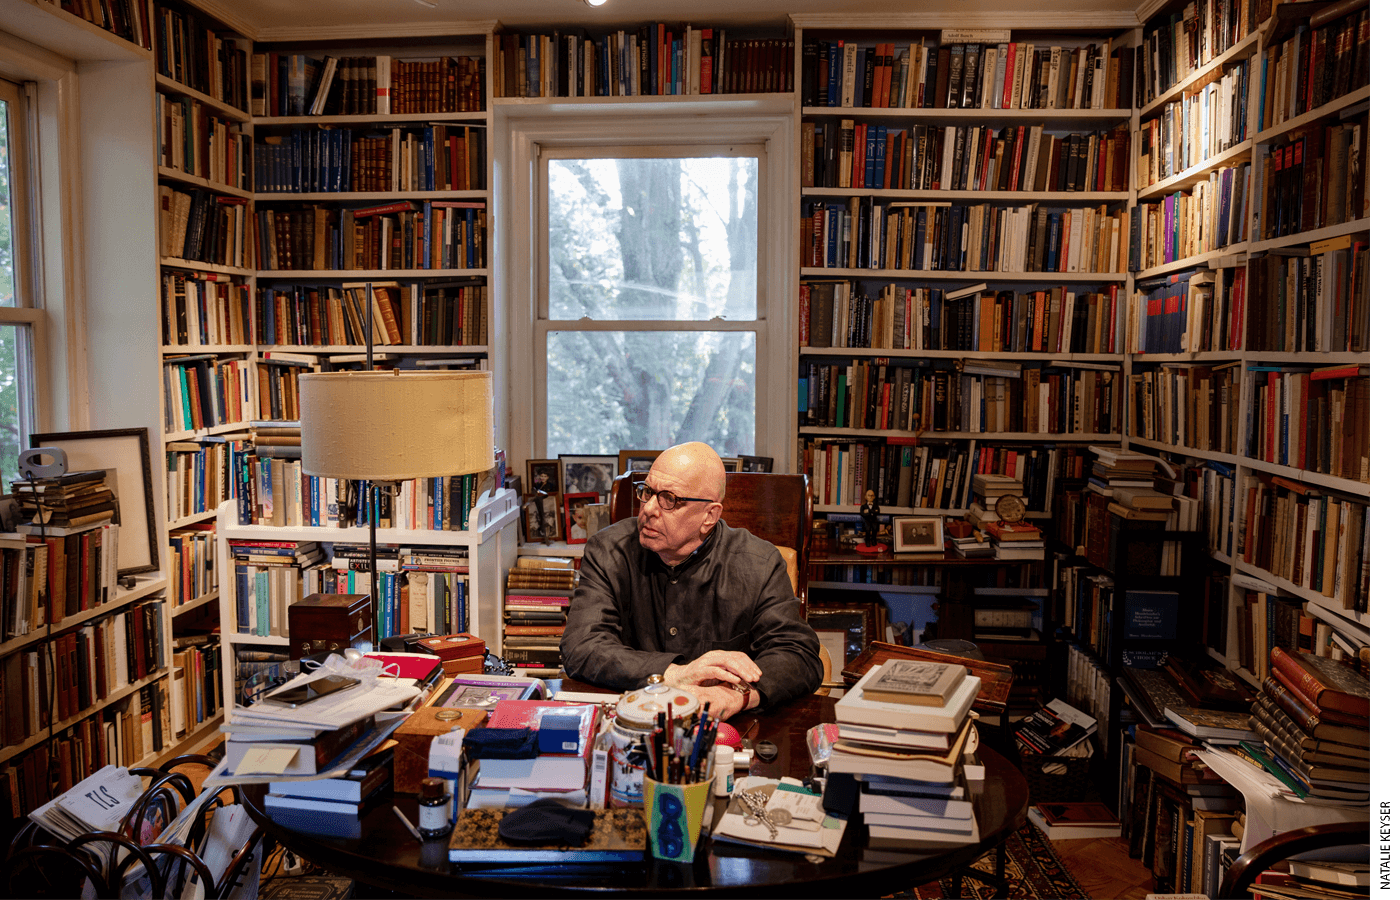 Bard College President Leon Botstein, pictured here in his office on Bard’s main campus, first wrote about reimagining “what the education of adolescents ought to be” in Jefferson’s Children , a book published in 1997.